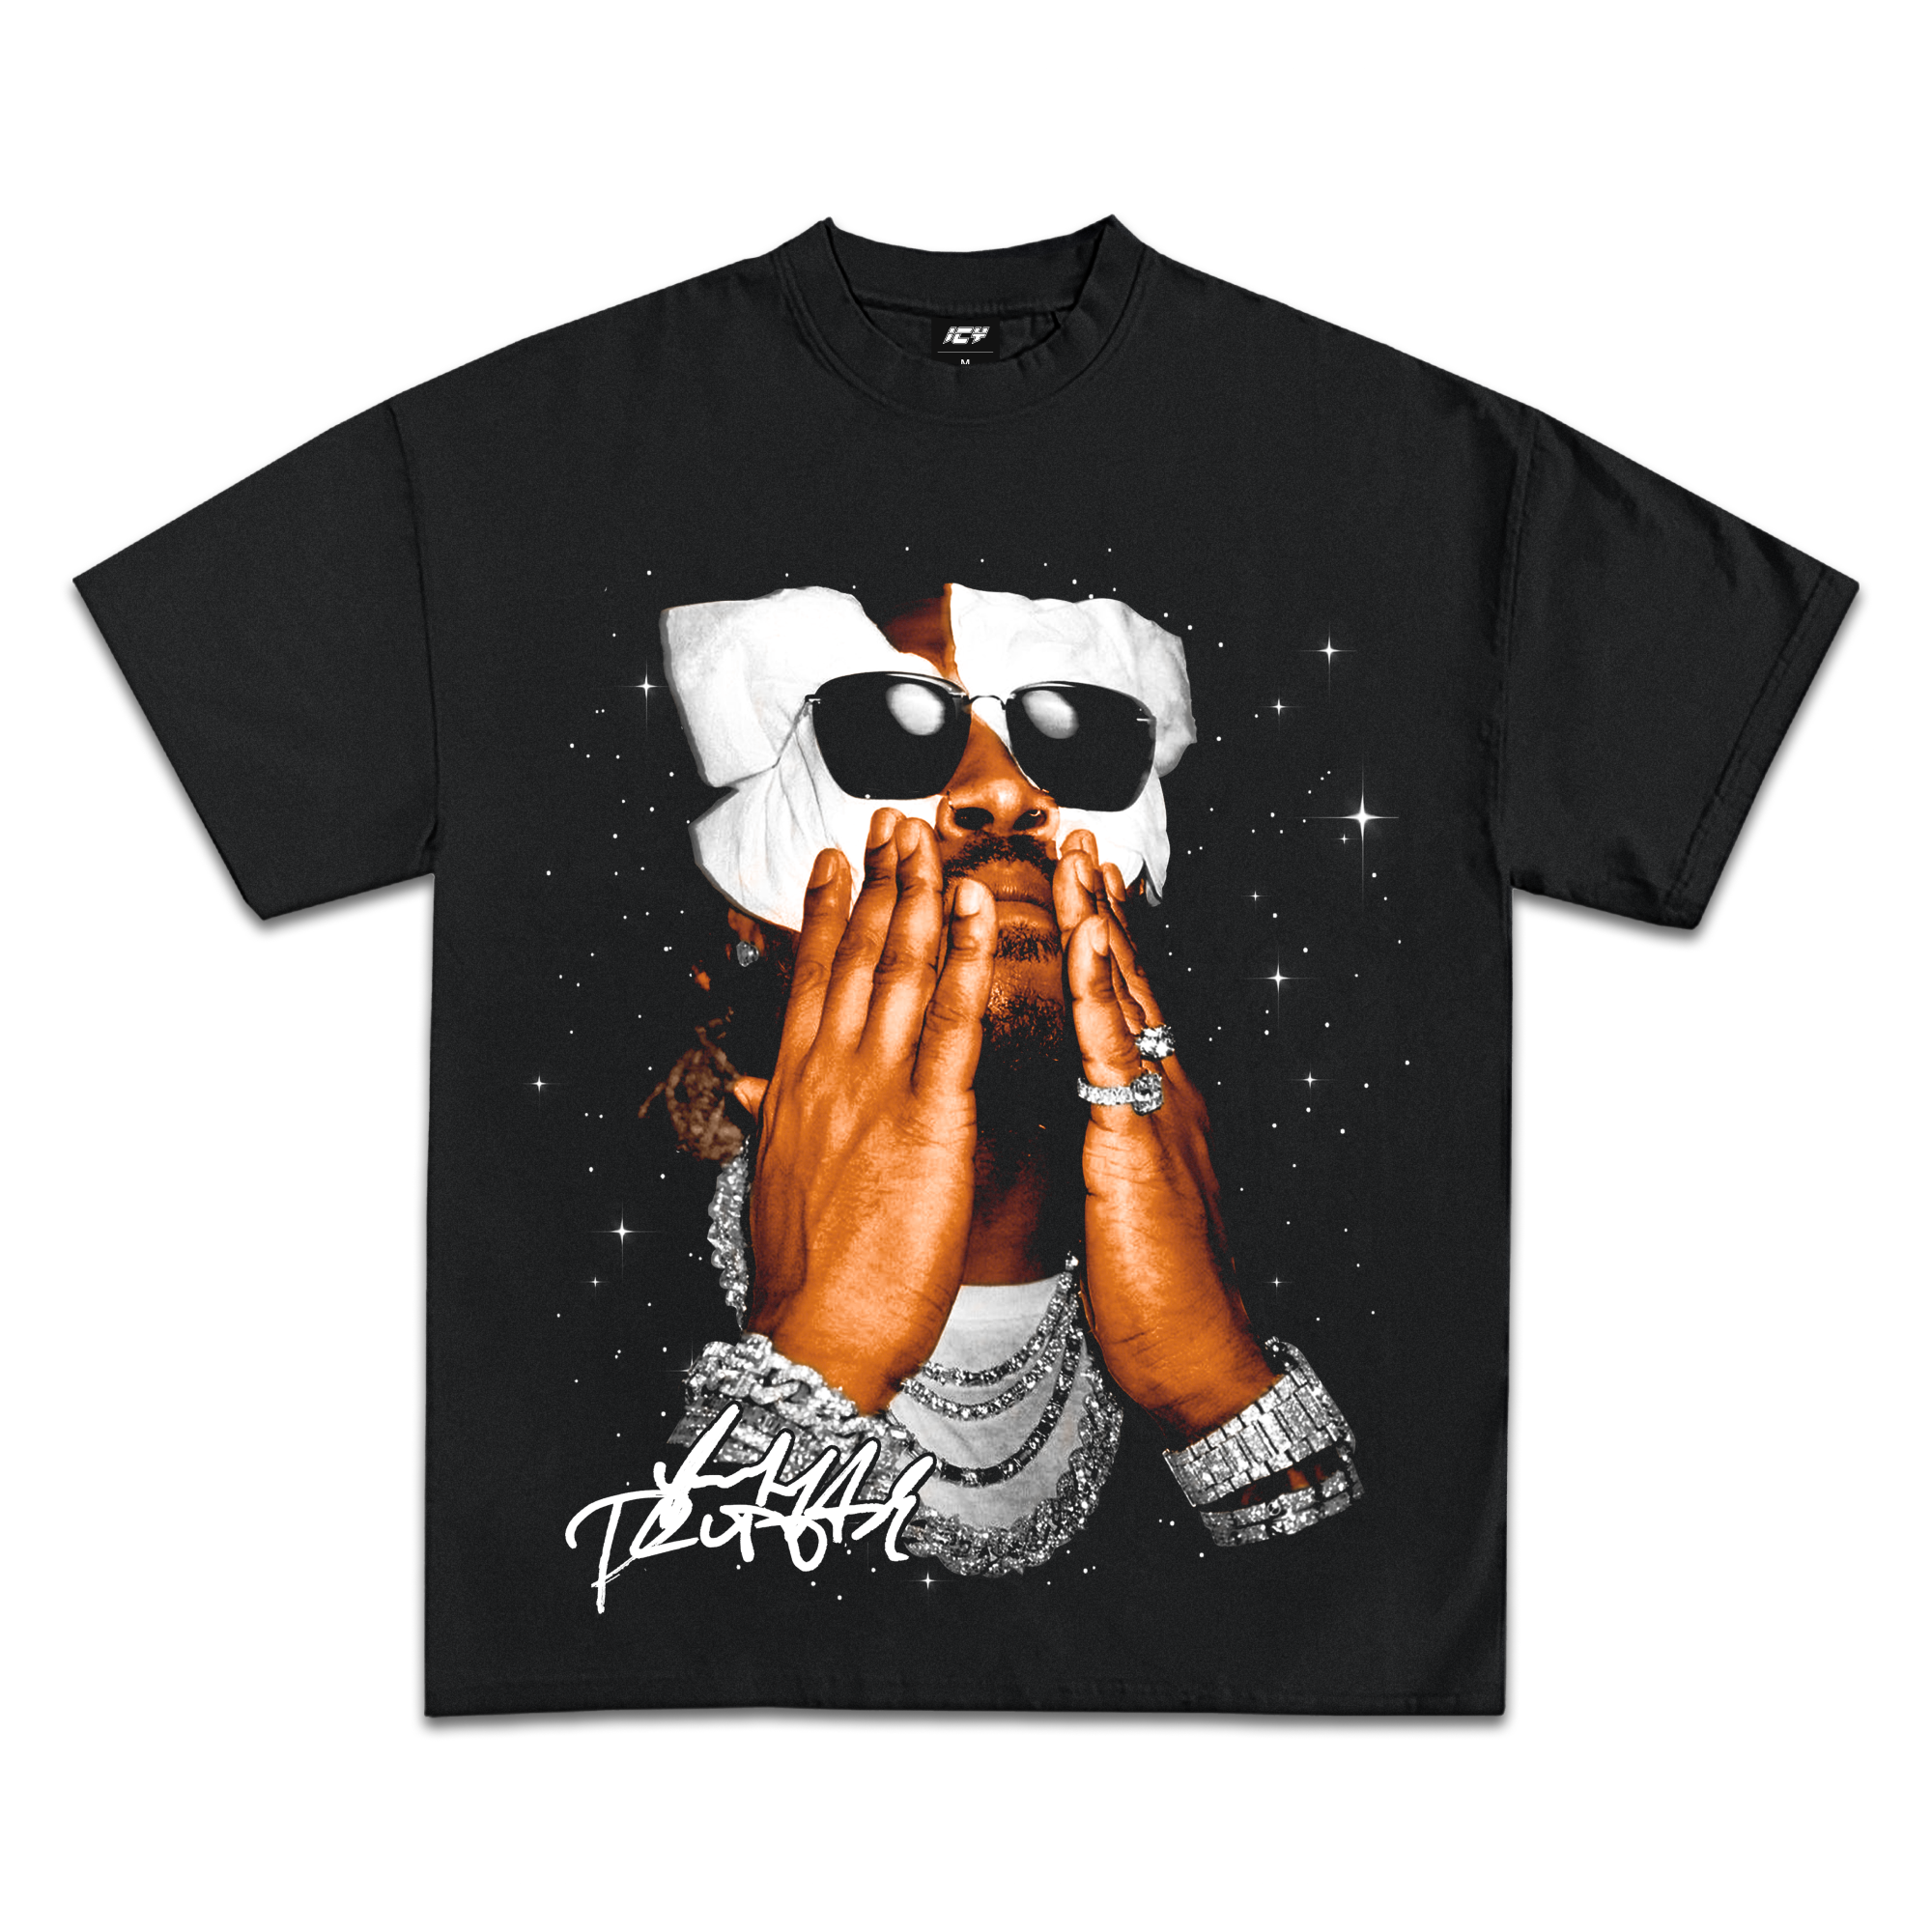 Future Hendrix Icy Exclusive Graphic T-Shirt